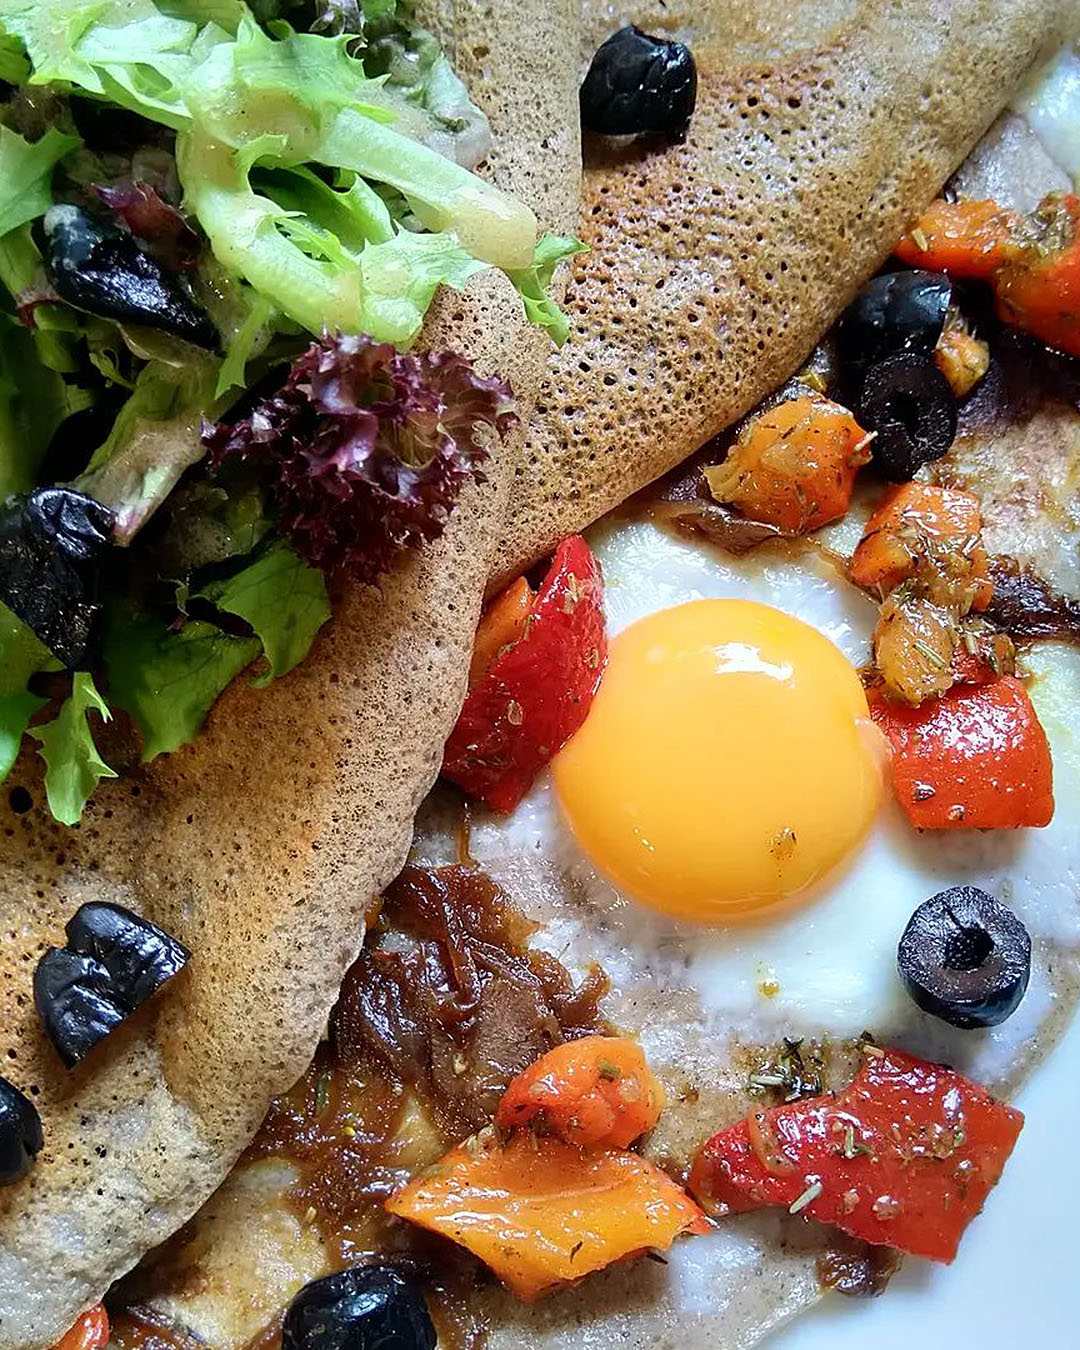 A delicious galette up close and personal from Rustic Cuisine, one of the best cafes in Nelson.